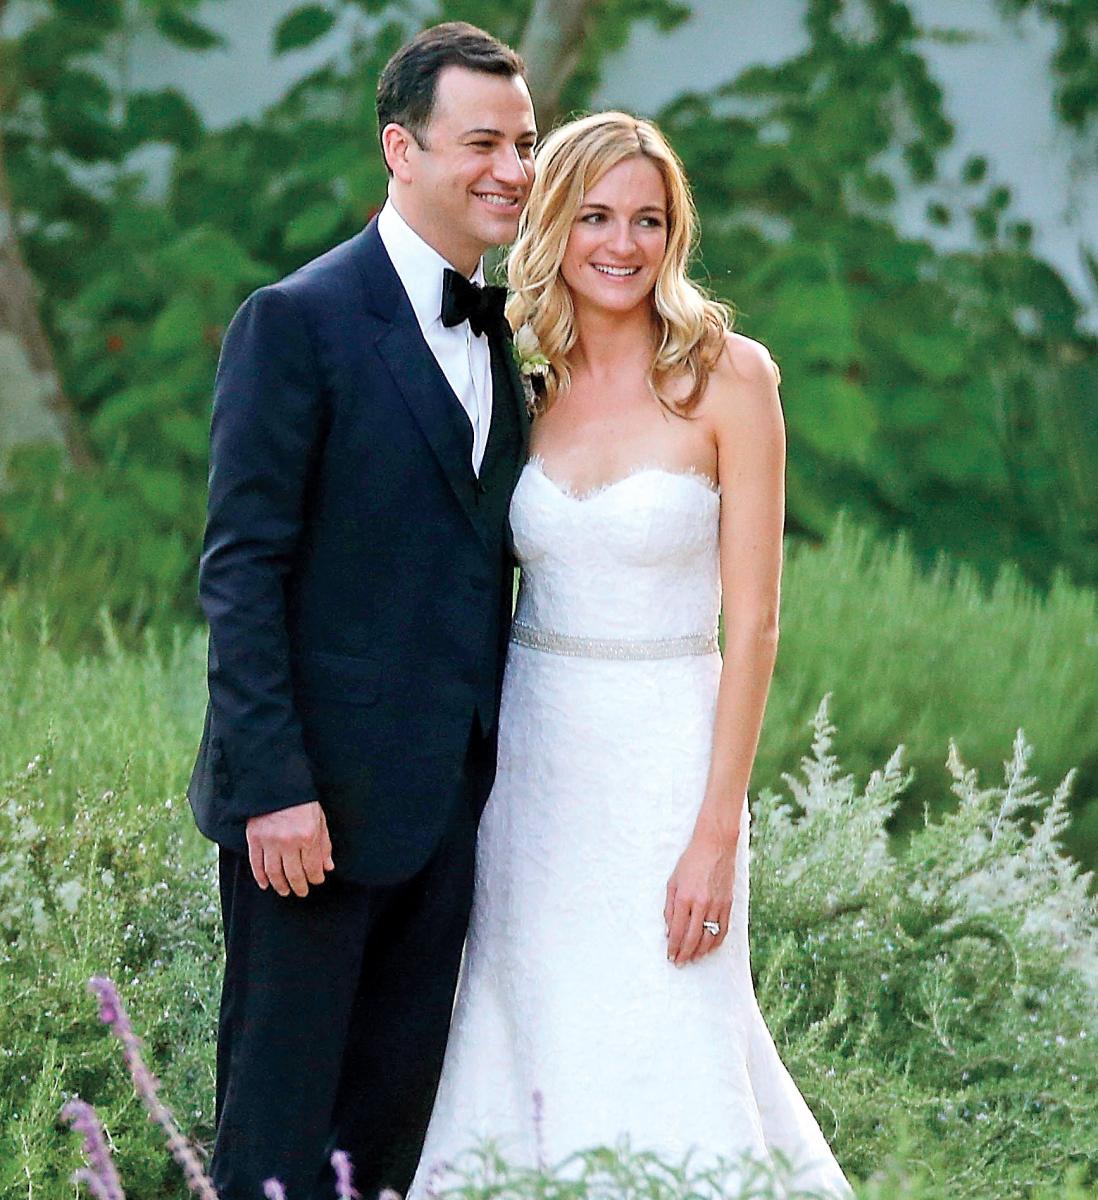 Kimmel and Molly McNearney at their wedding